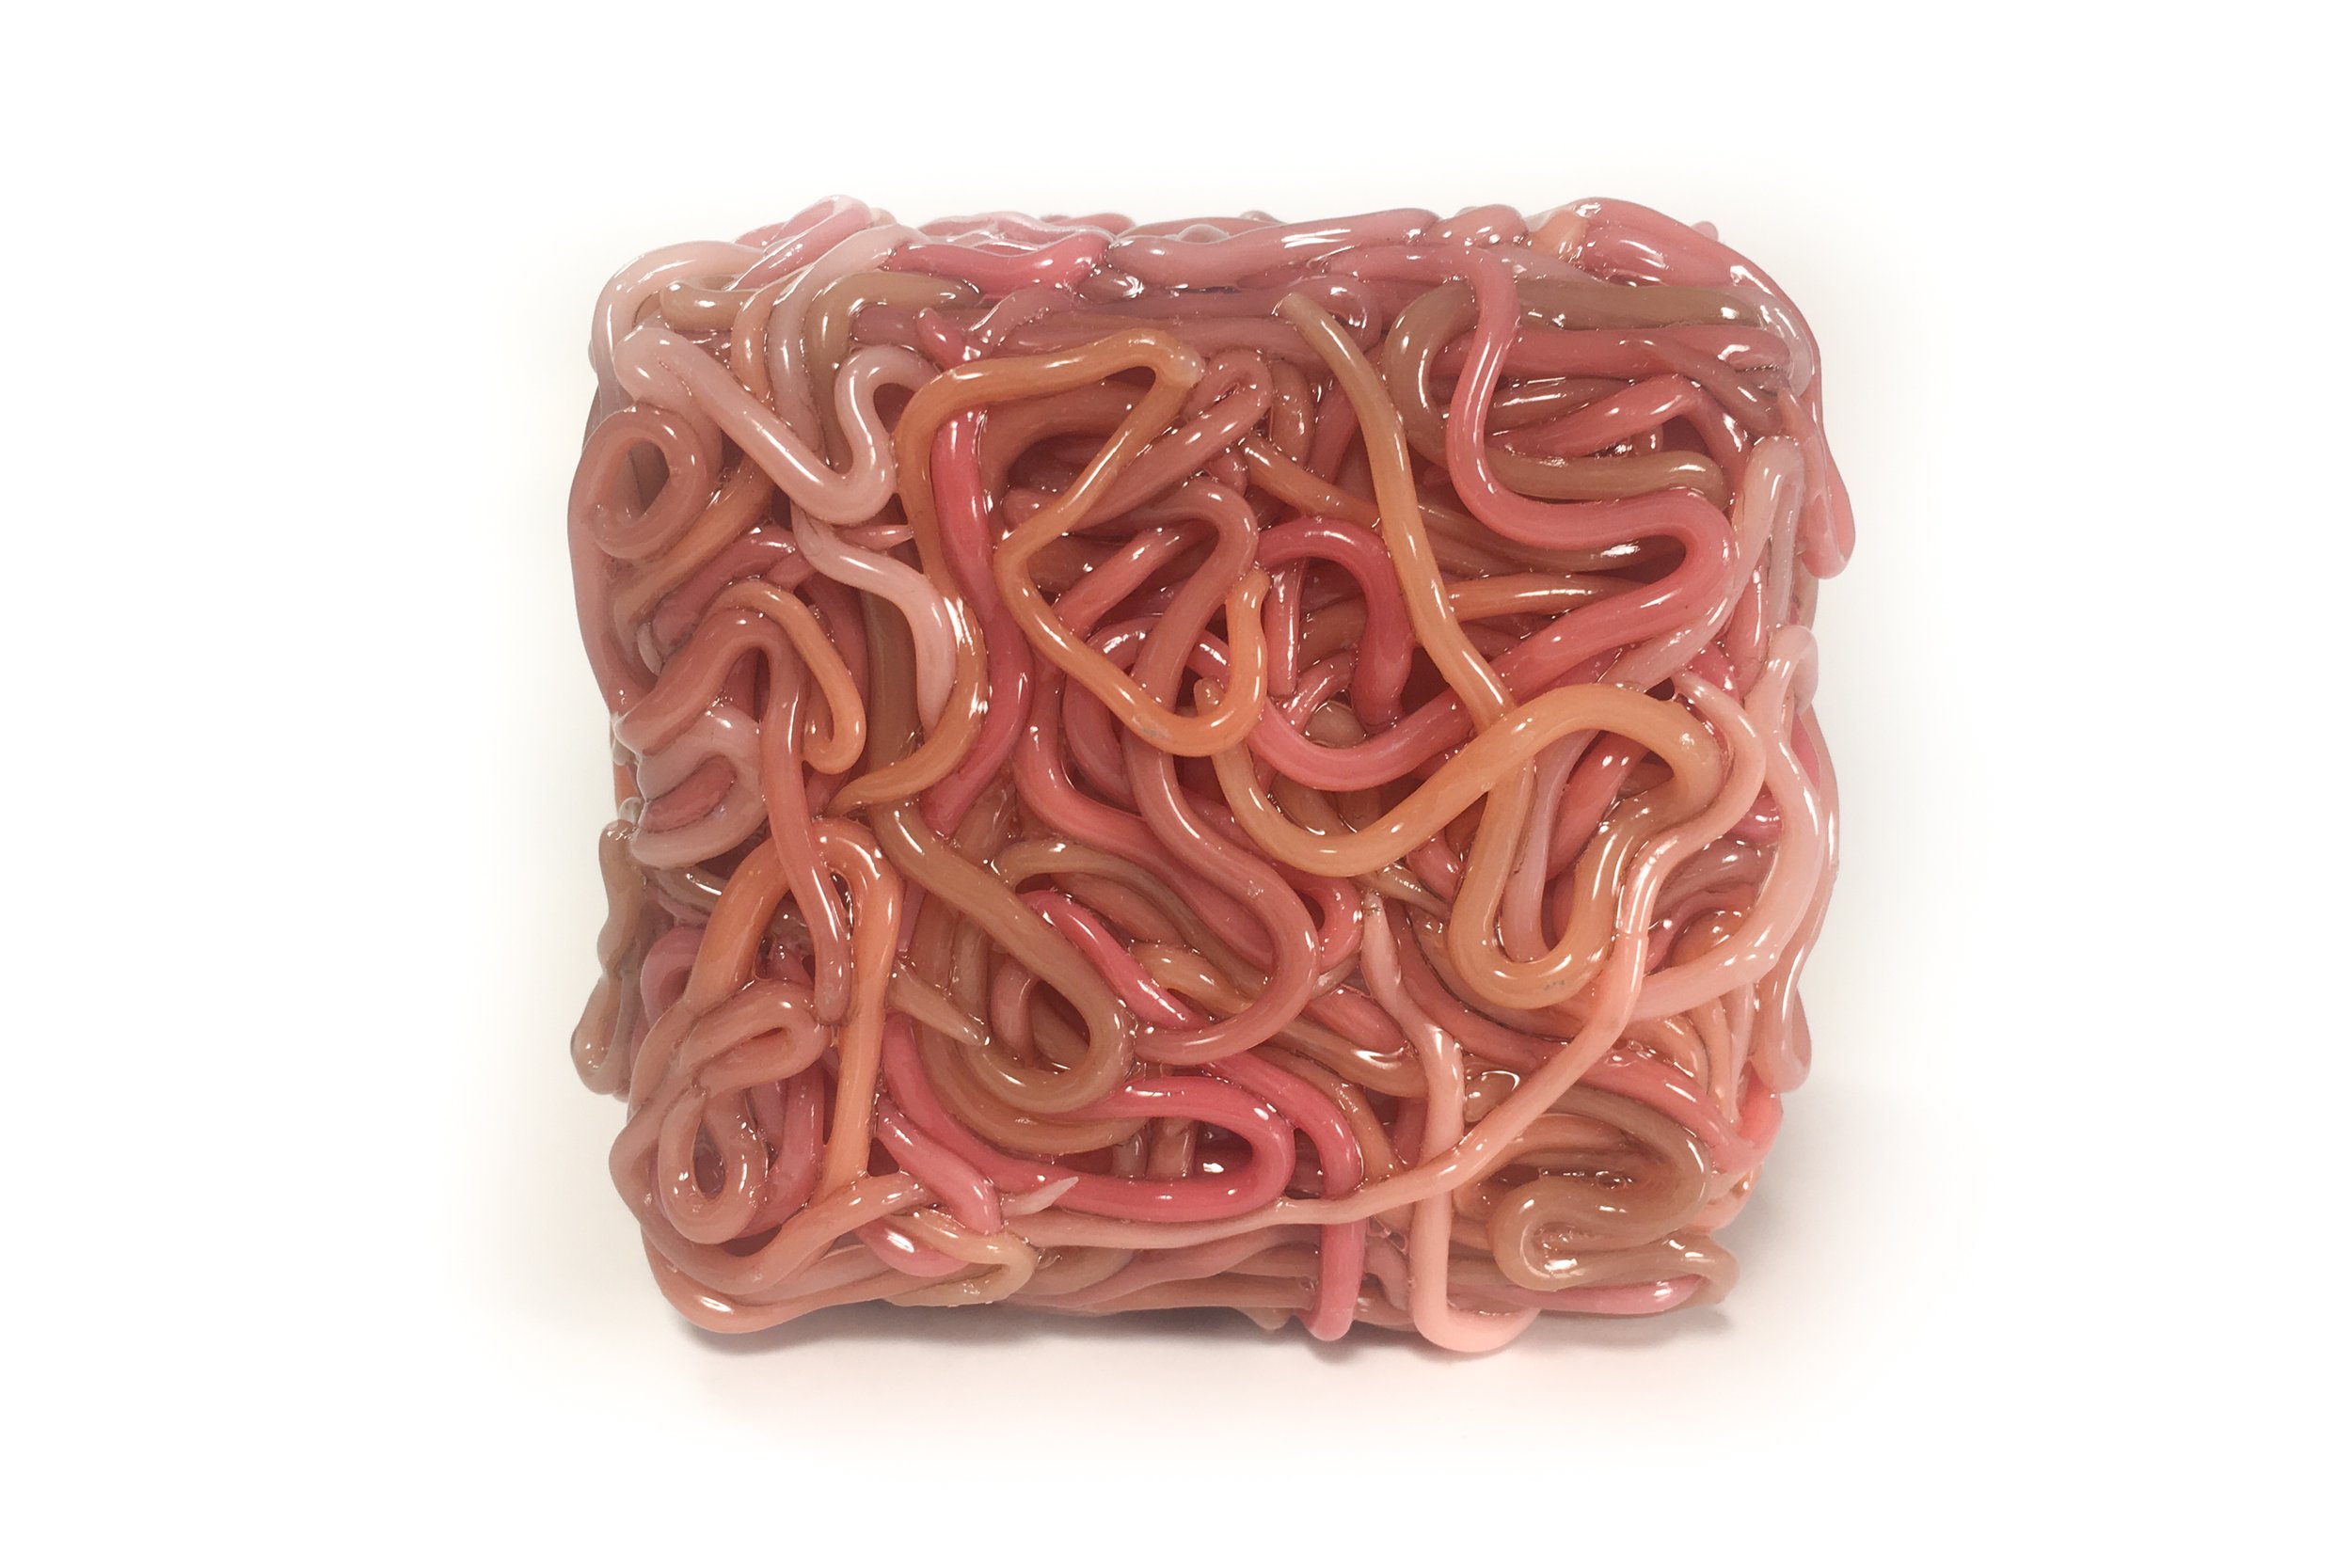  Worm Cube, 2021. Polymer clay and acrylic. 